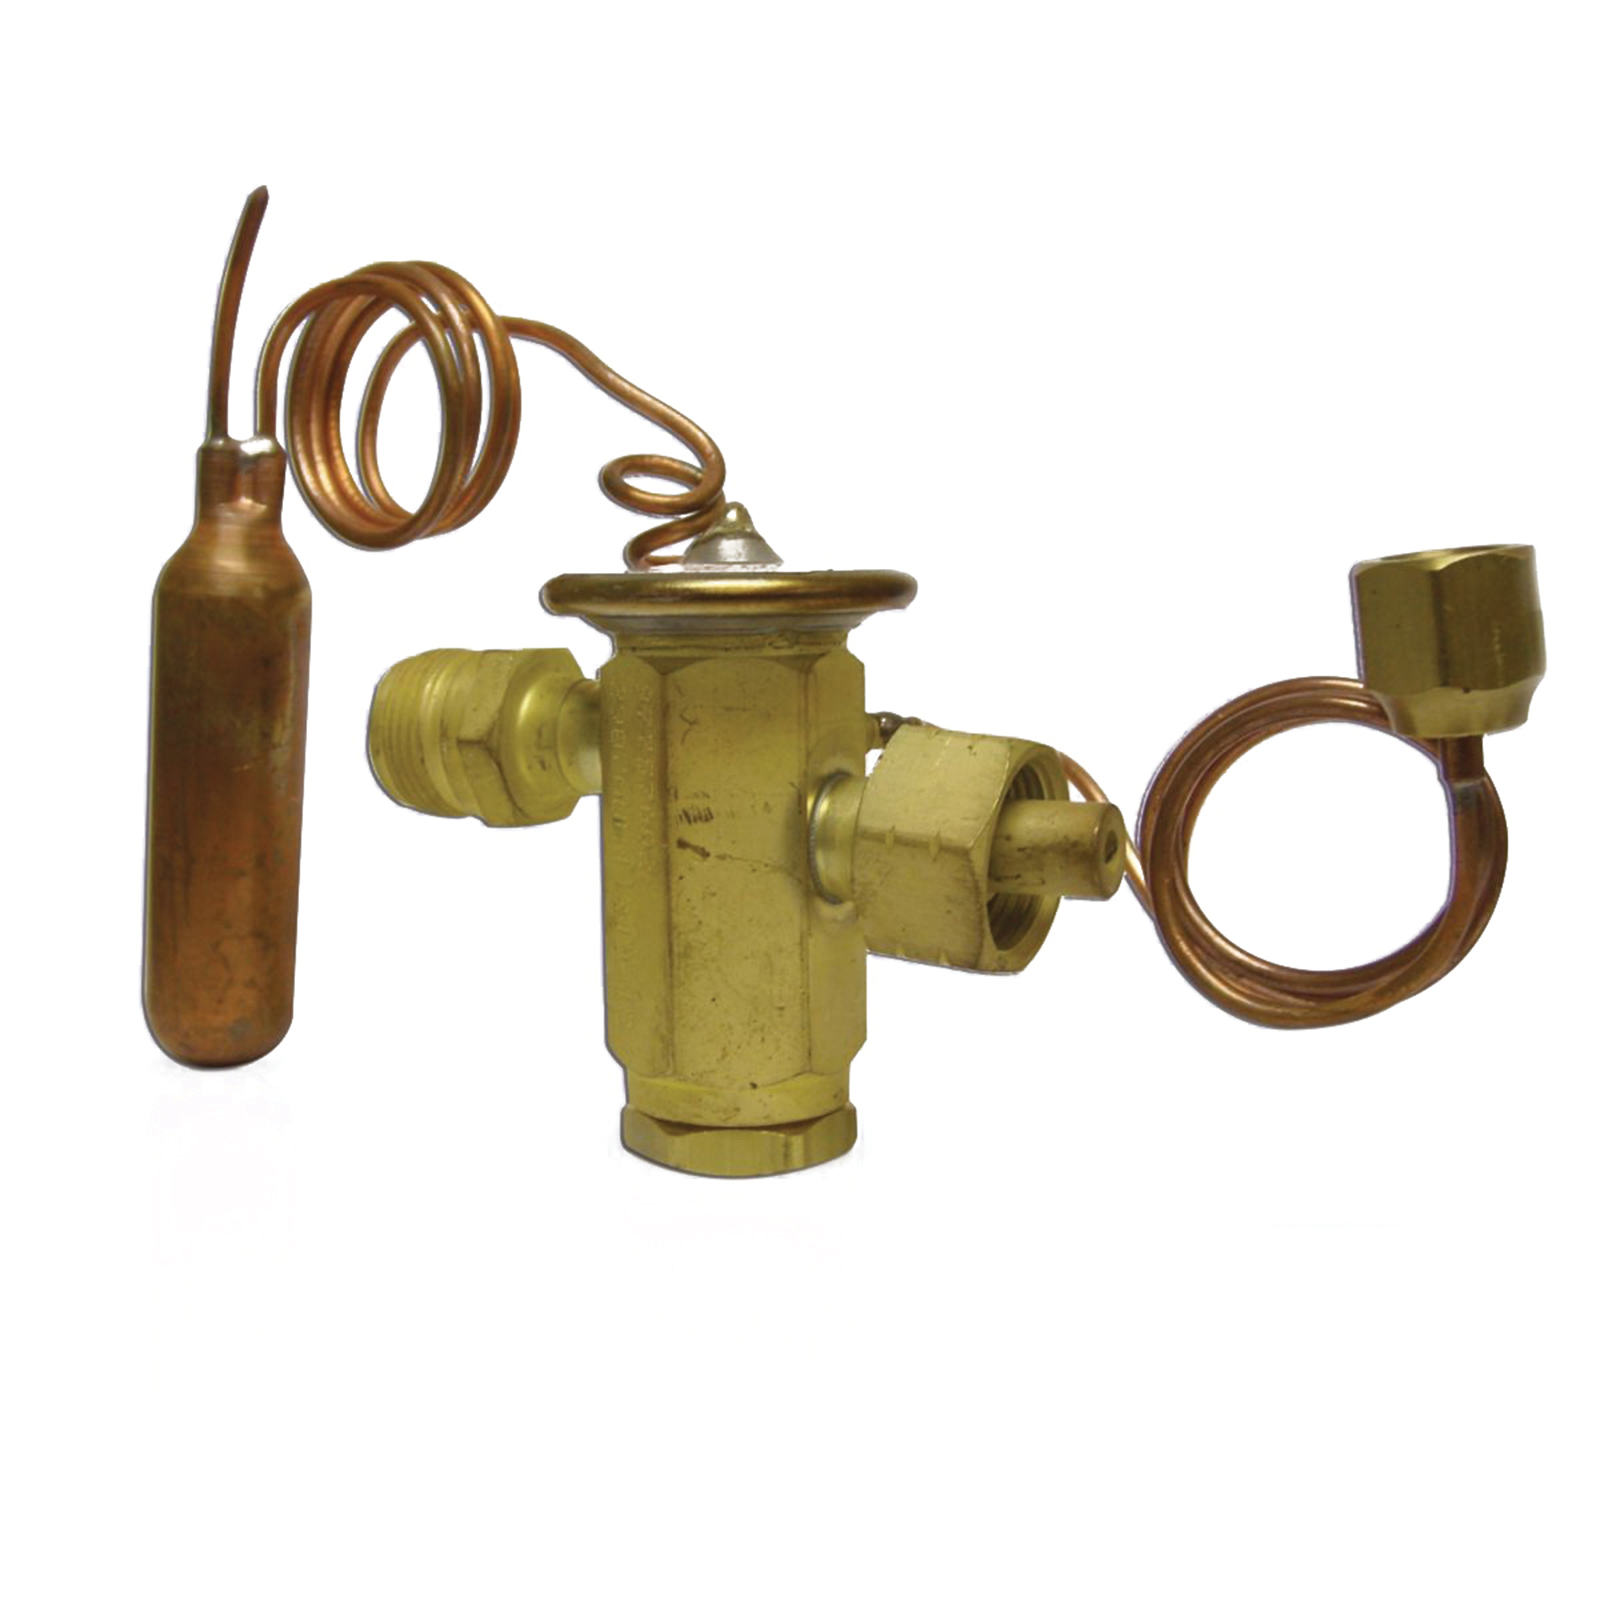 NON-BLEED THERMOSTATIC EXPANSION VALVE